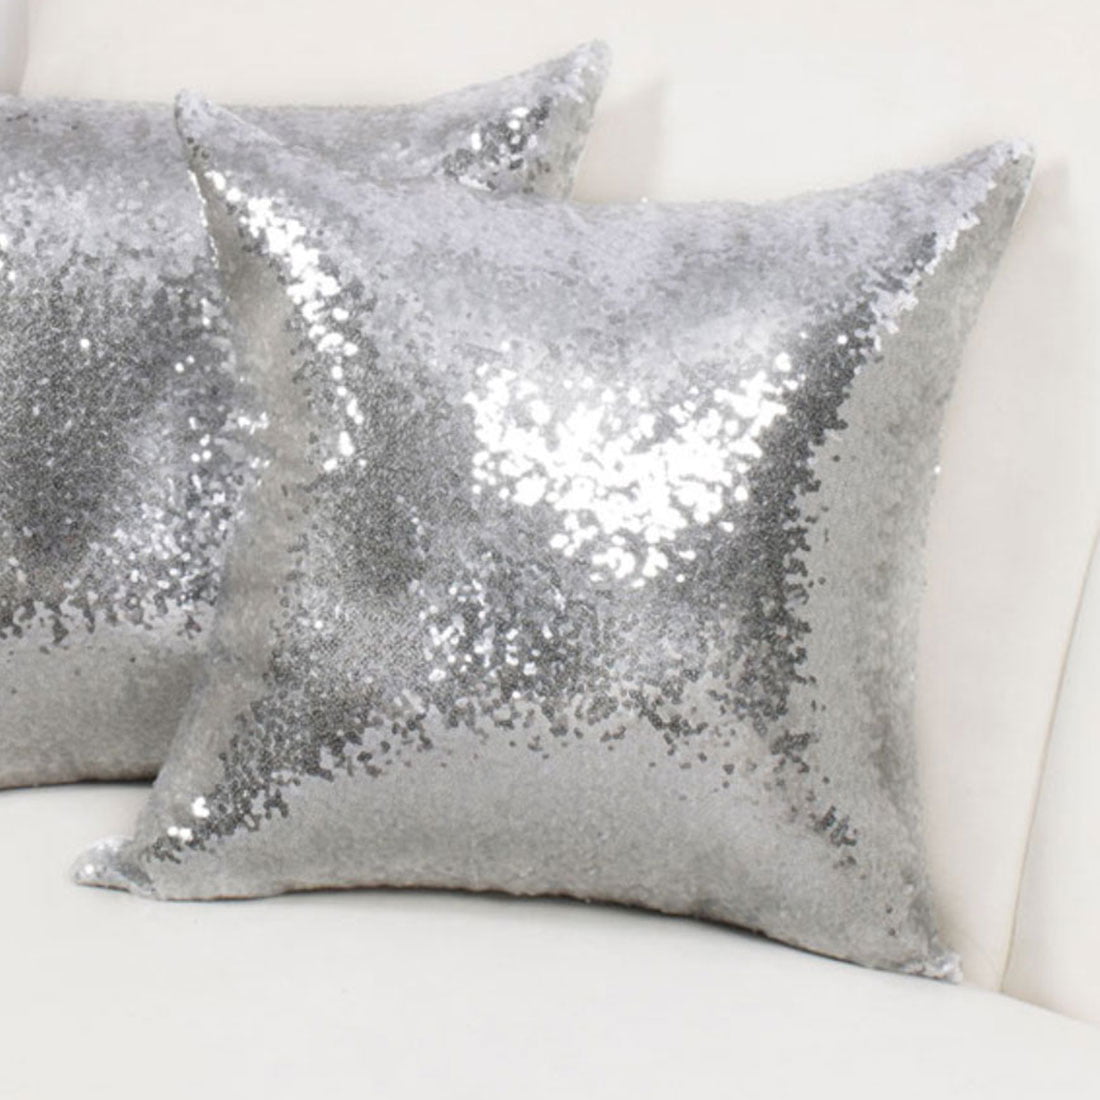 Pink Shiny Sparkling Satin Square Pillowcase Cover for Livingroom Decor Wedding Party Glitzy Decorative Cushion Cover 18x18 Inch PiccoCasa 2 Pcs Sequin Throw Pillow Covers 